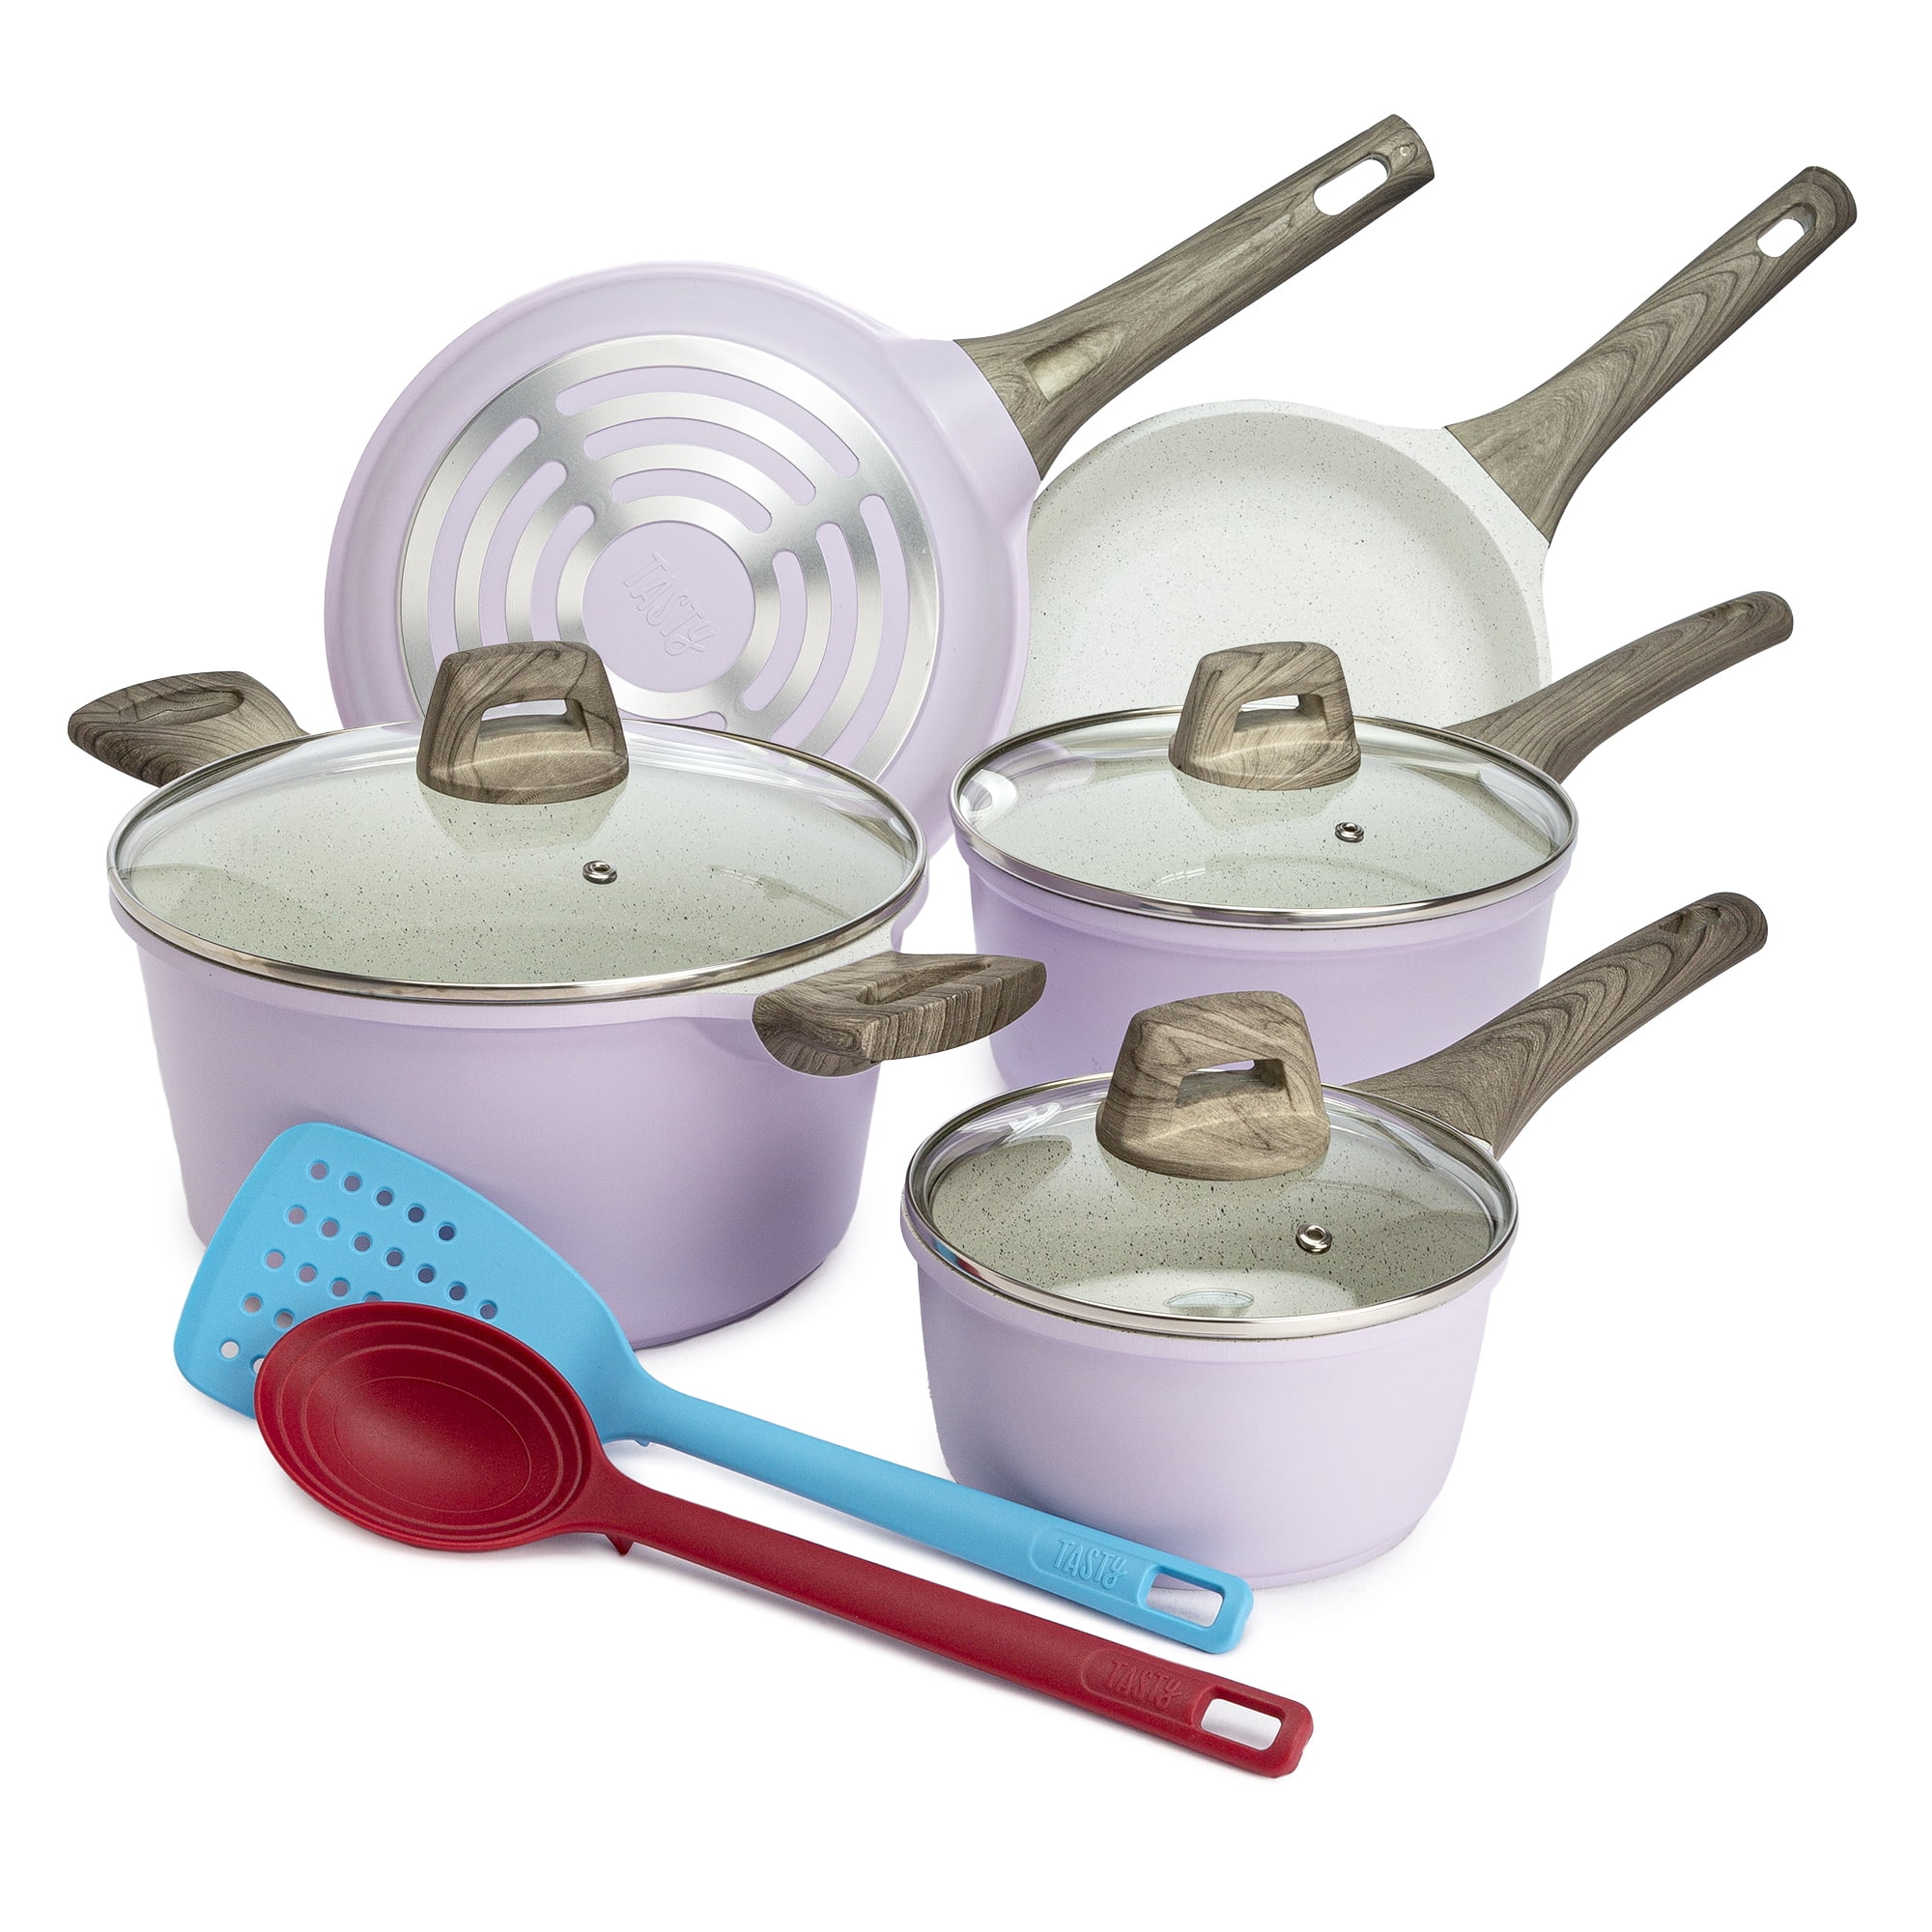 Let me tell you about my new cookware set! It's from the brand Sensart, Cookware